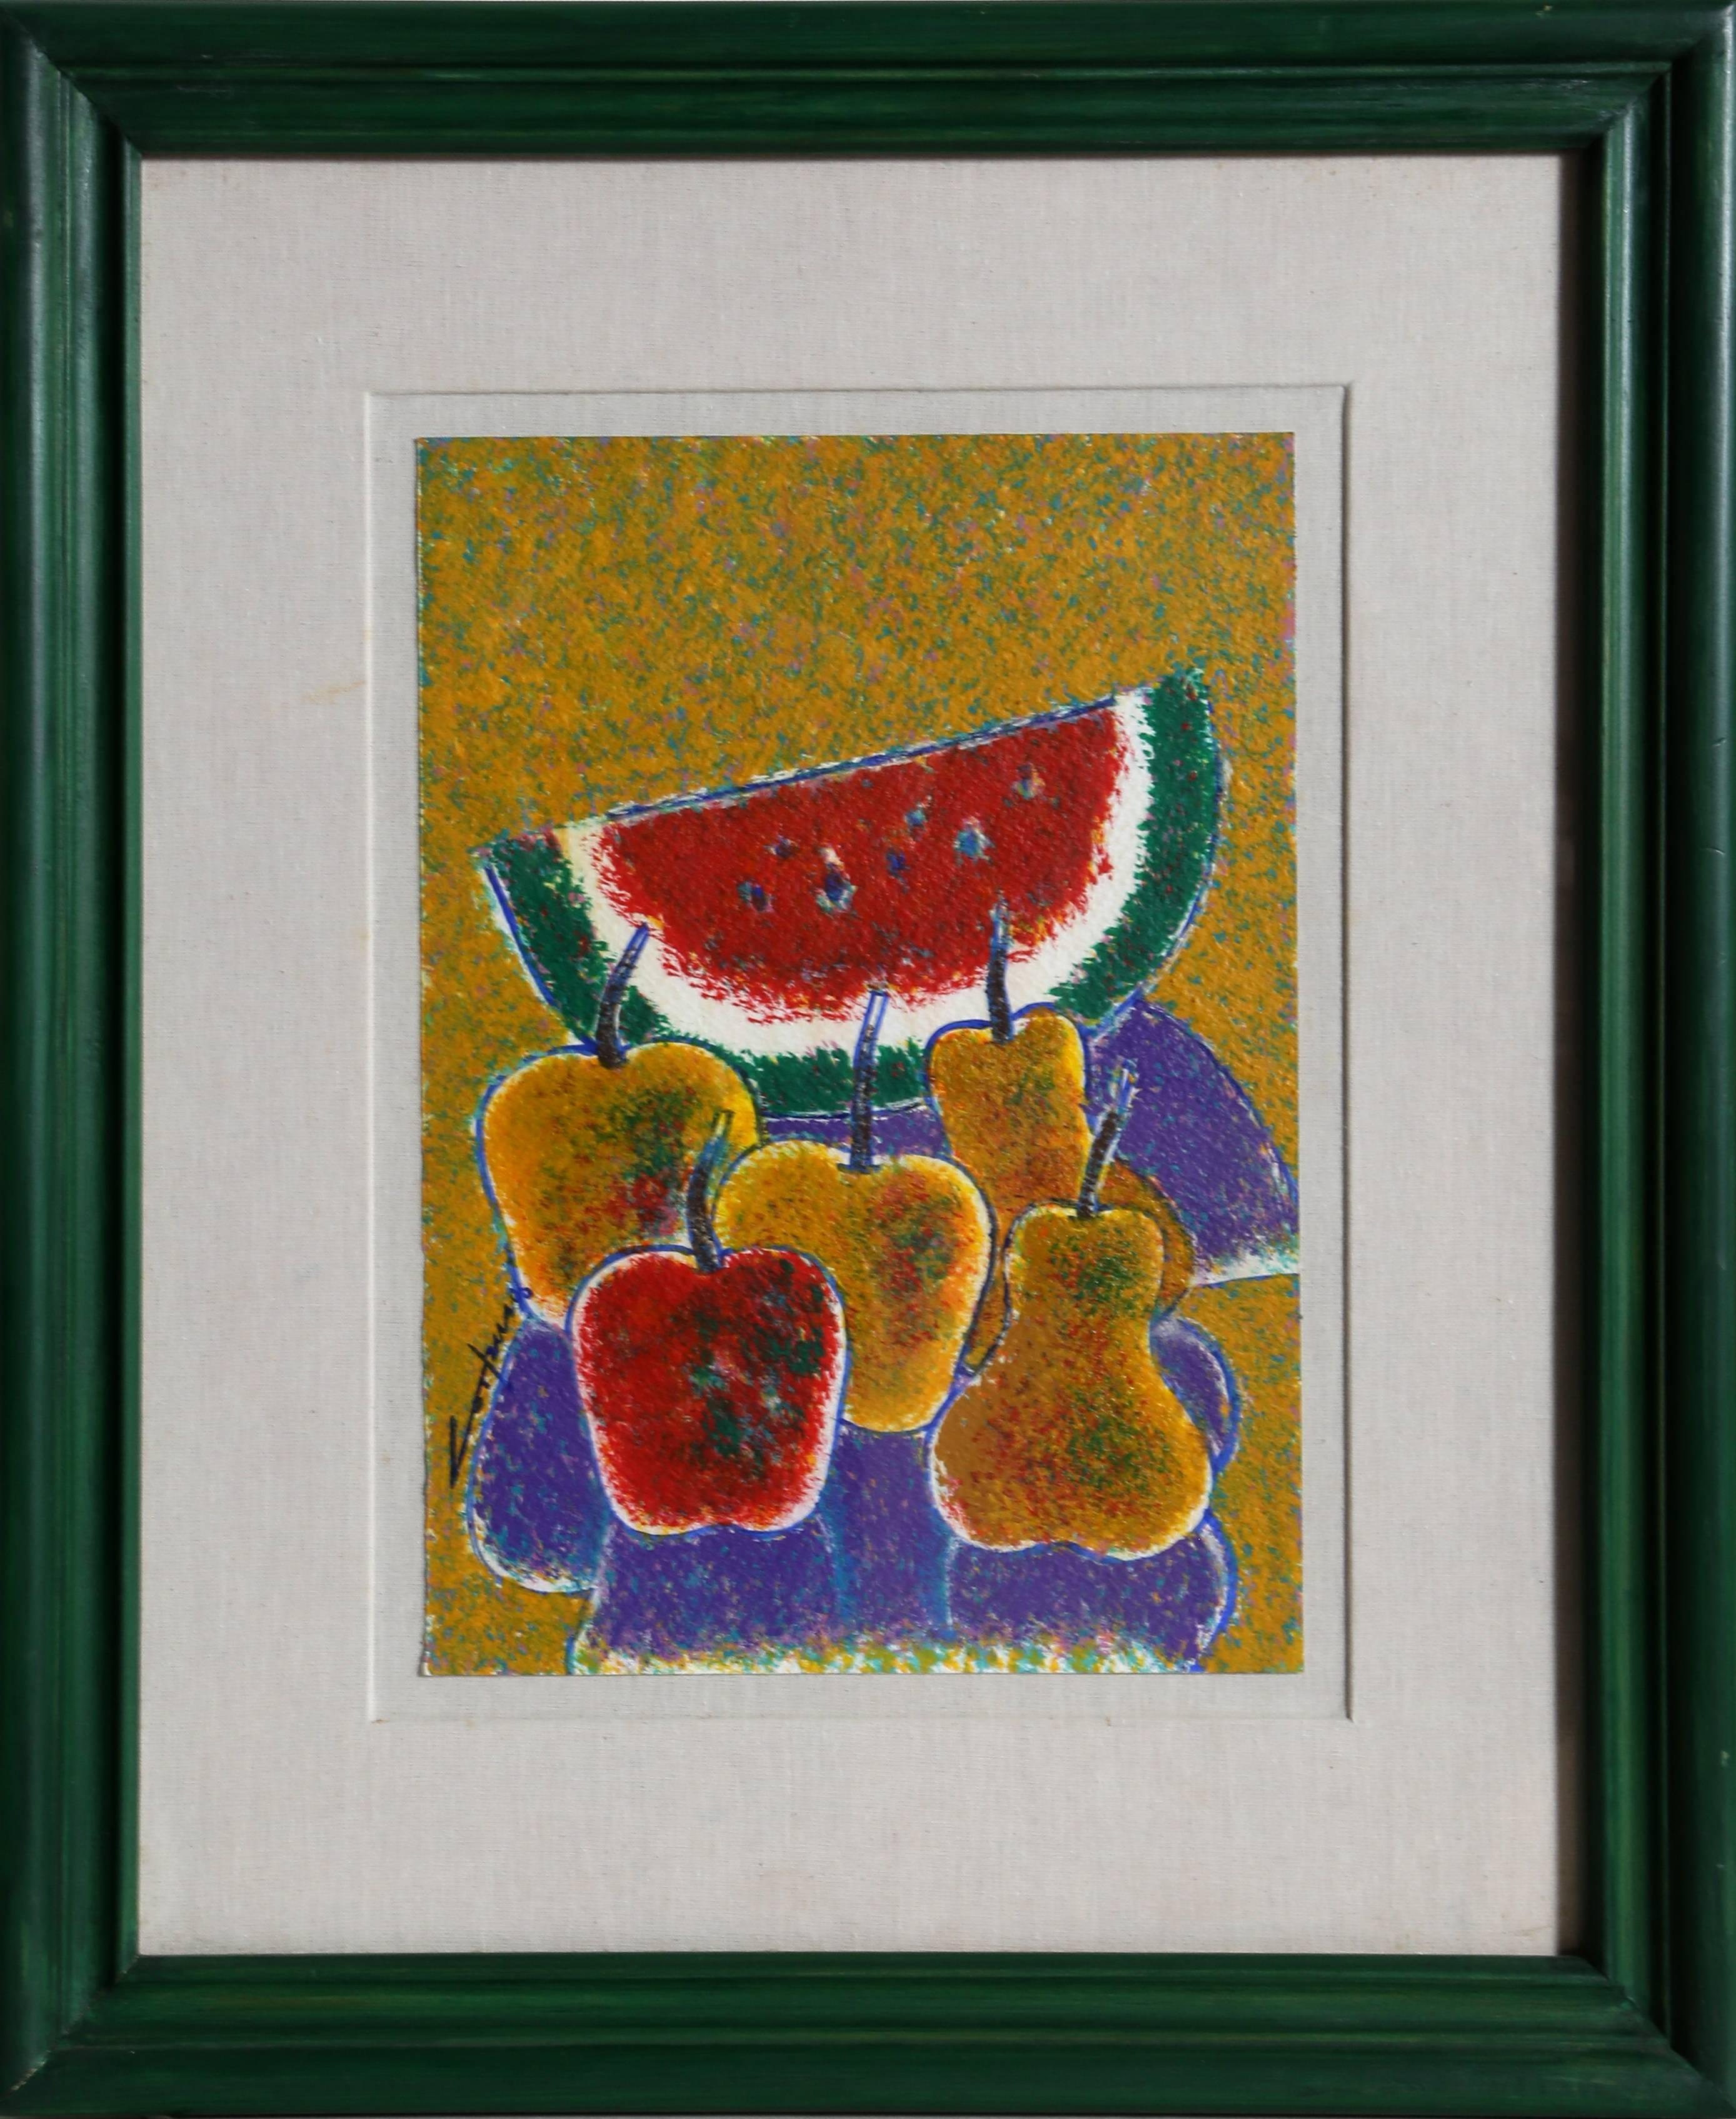 Artist: Fidel Corpus, Mexican
Title:  Frutas
Year: 1996
Medium: Acrylic on Paper, signed, titled and dated verso
Size: 13.5 x 9.75 inches
Frame Size: 23 x 19 inches



